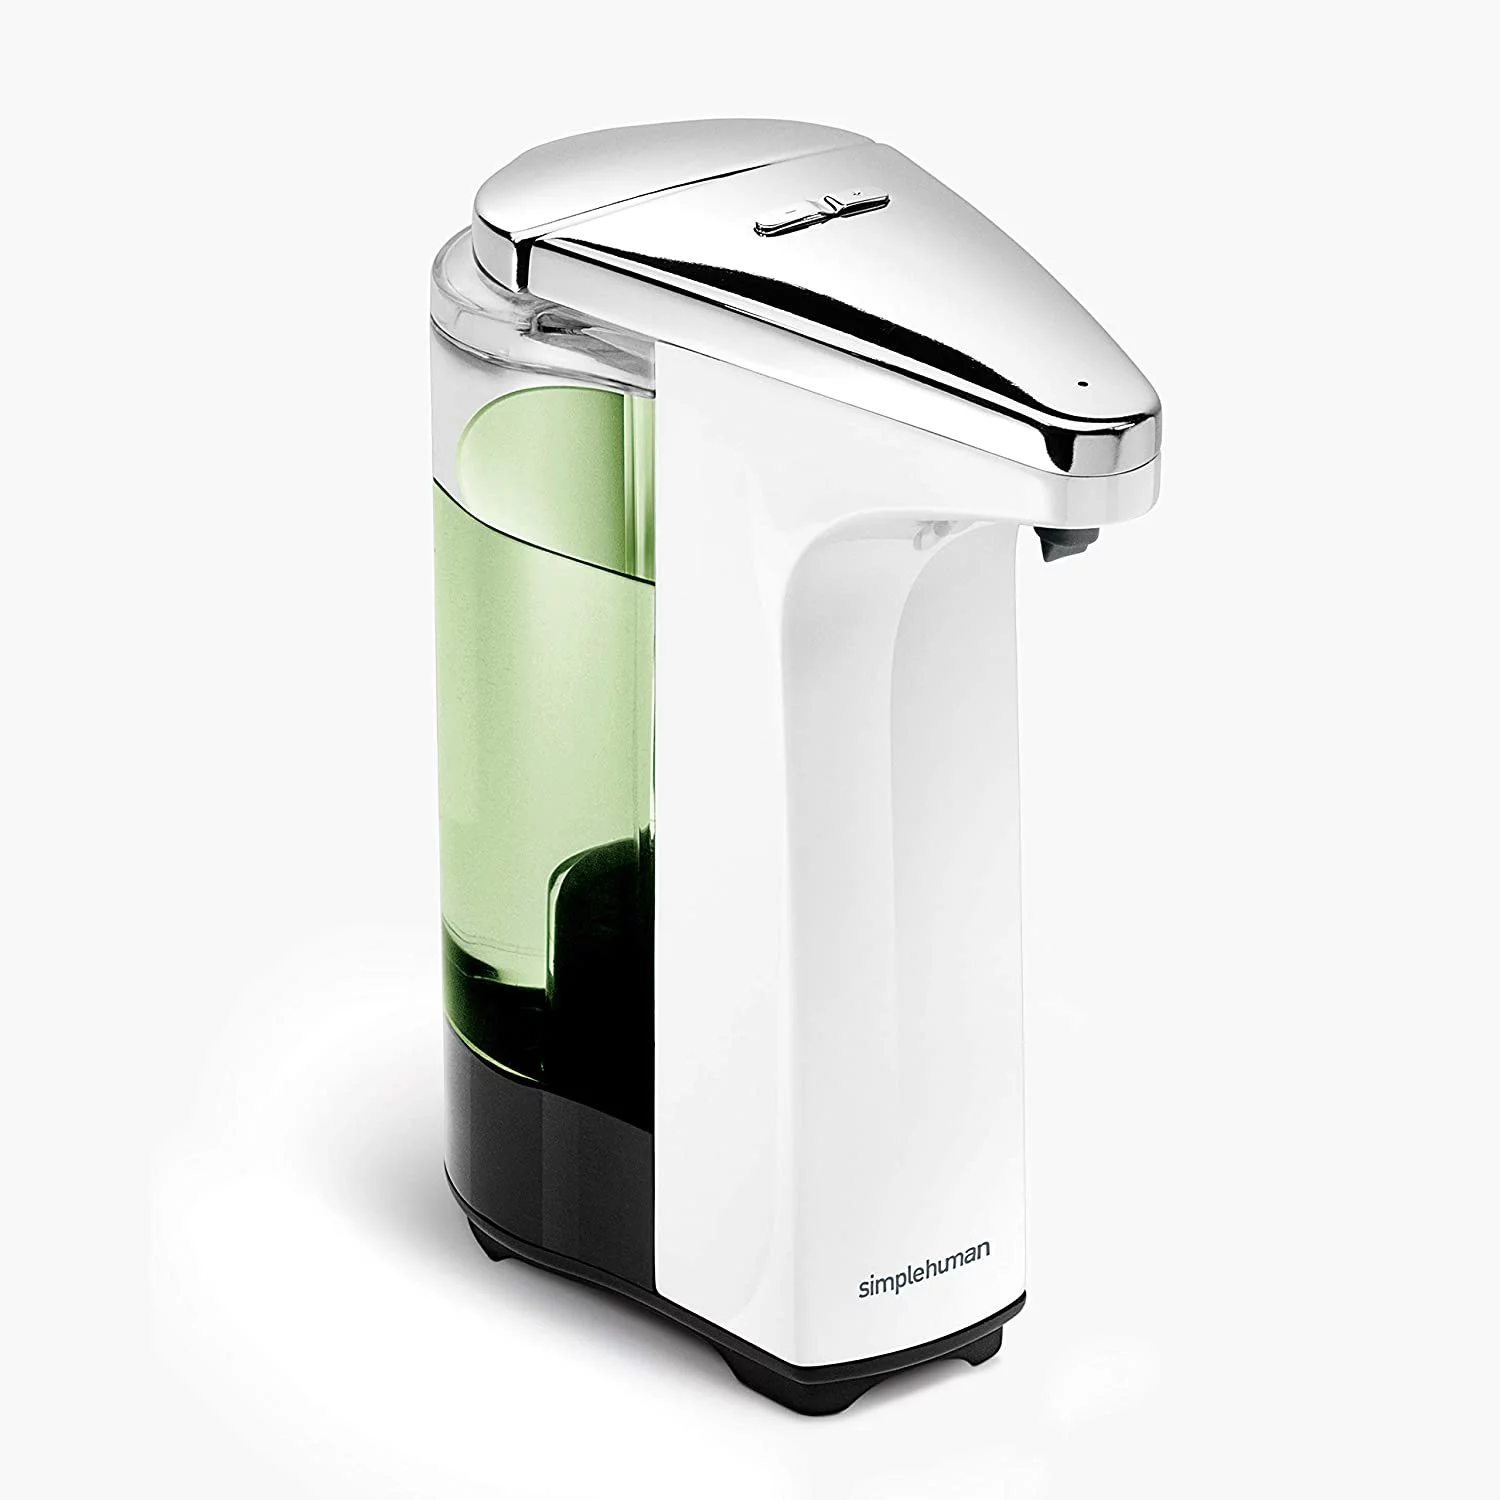 11 Best Simple Human Soap Dispenser Automatic for 2023